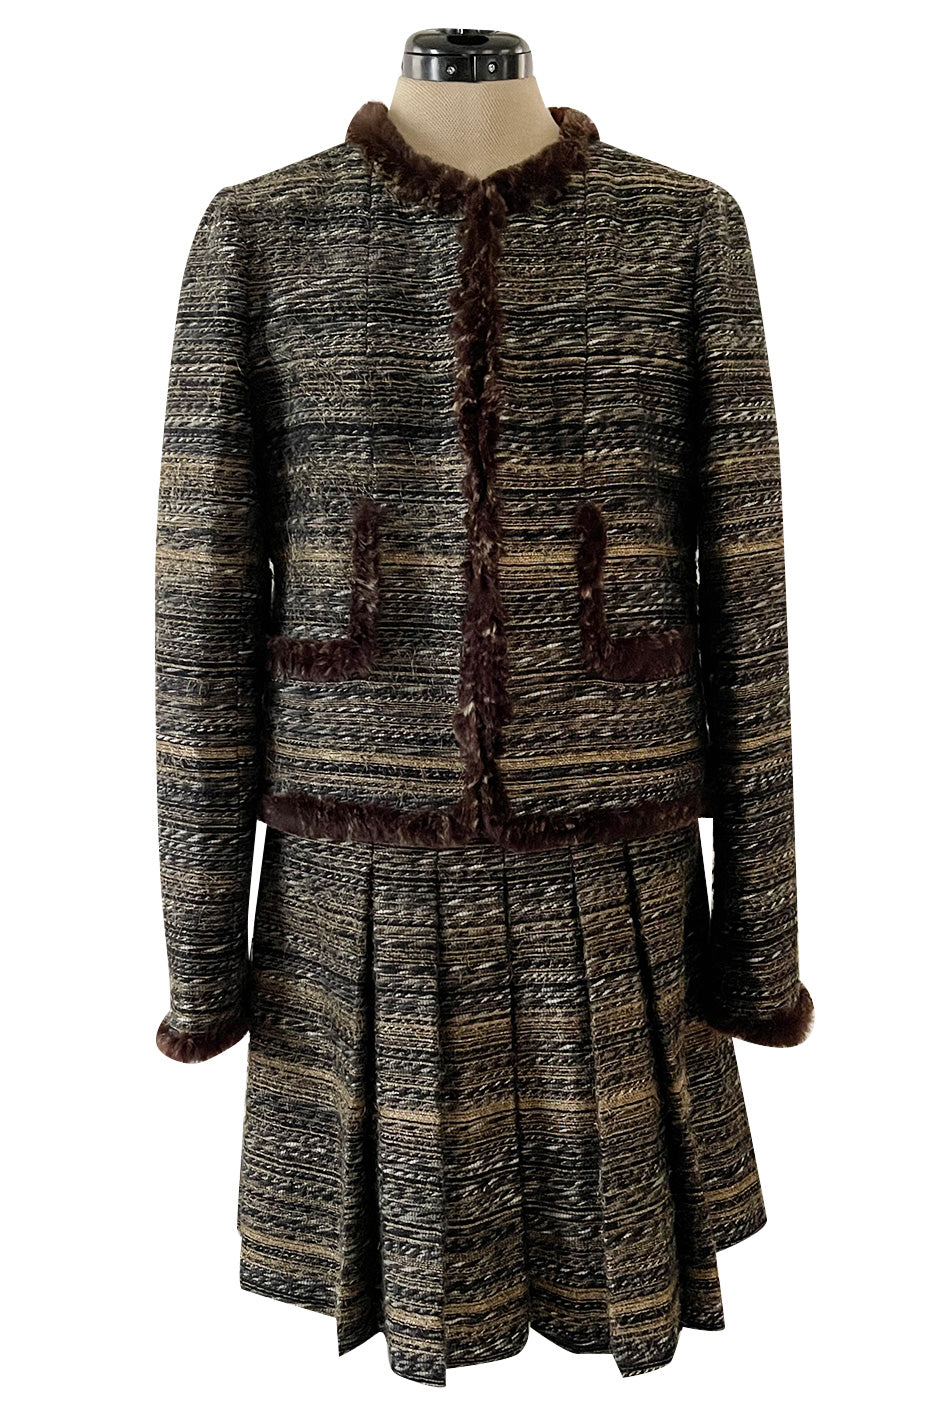 Chanel 1996 Tweed Plaid Jacket and Skirt Suit - Foxy Couture Carmel